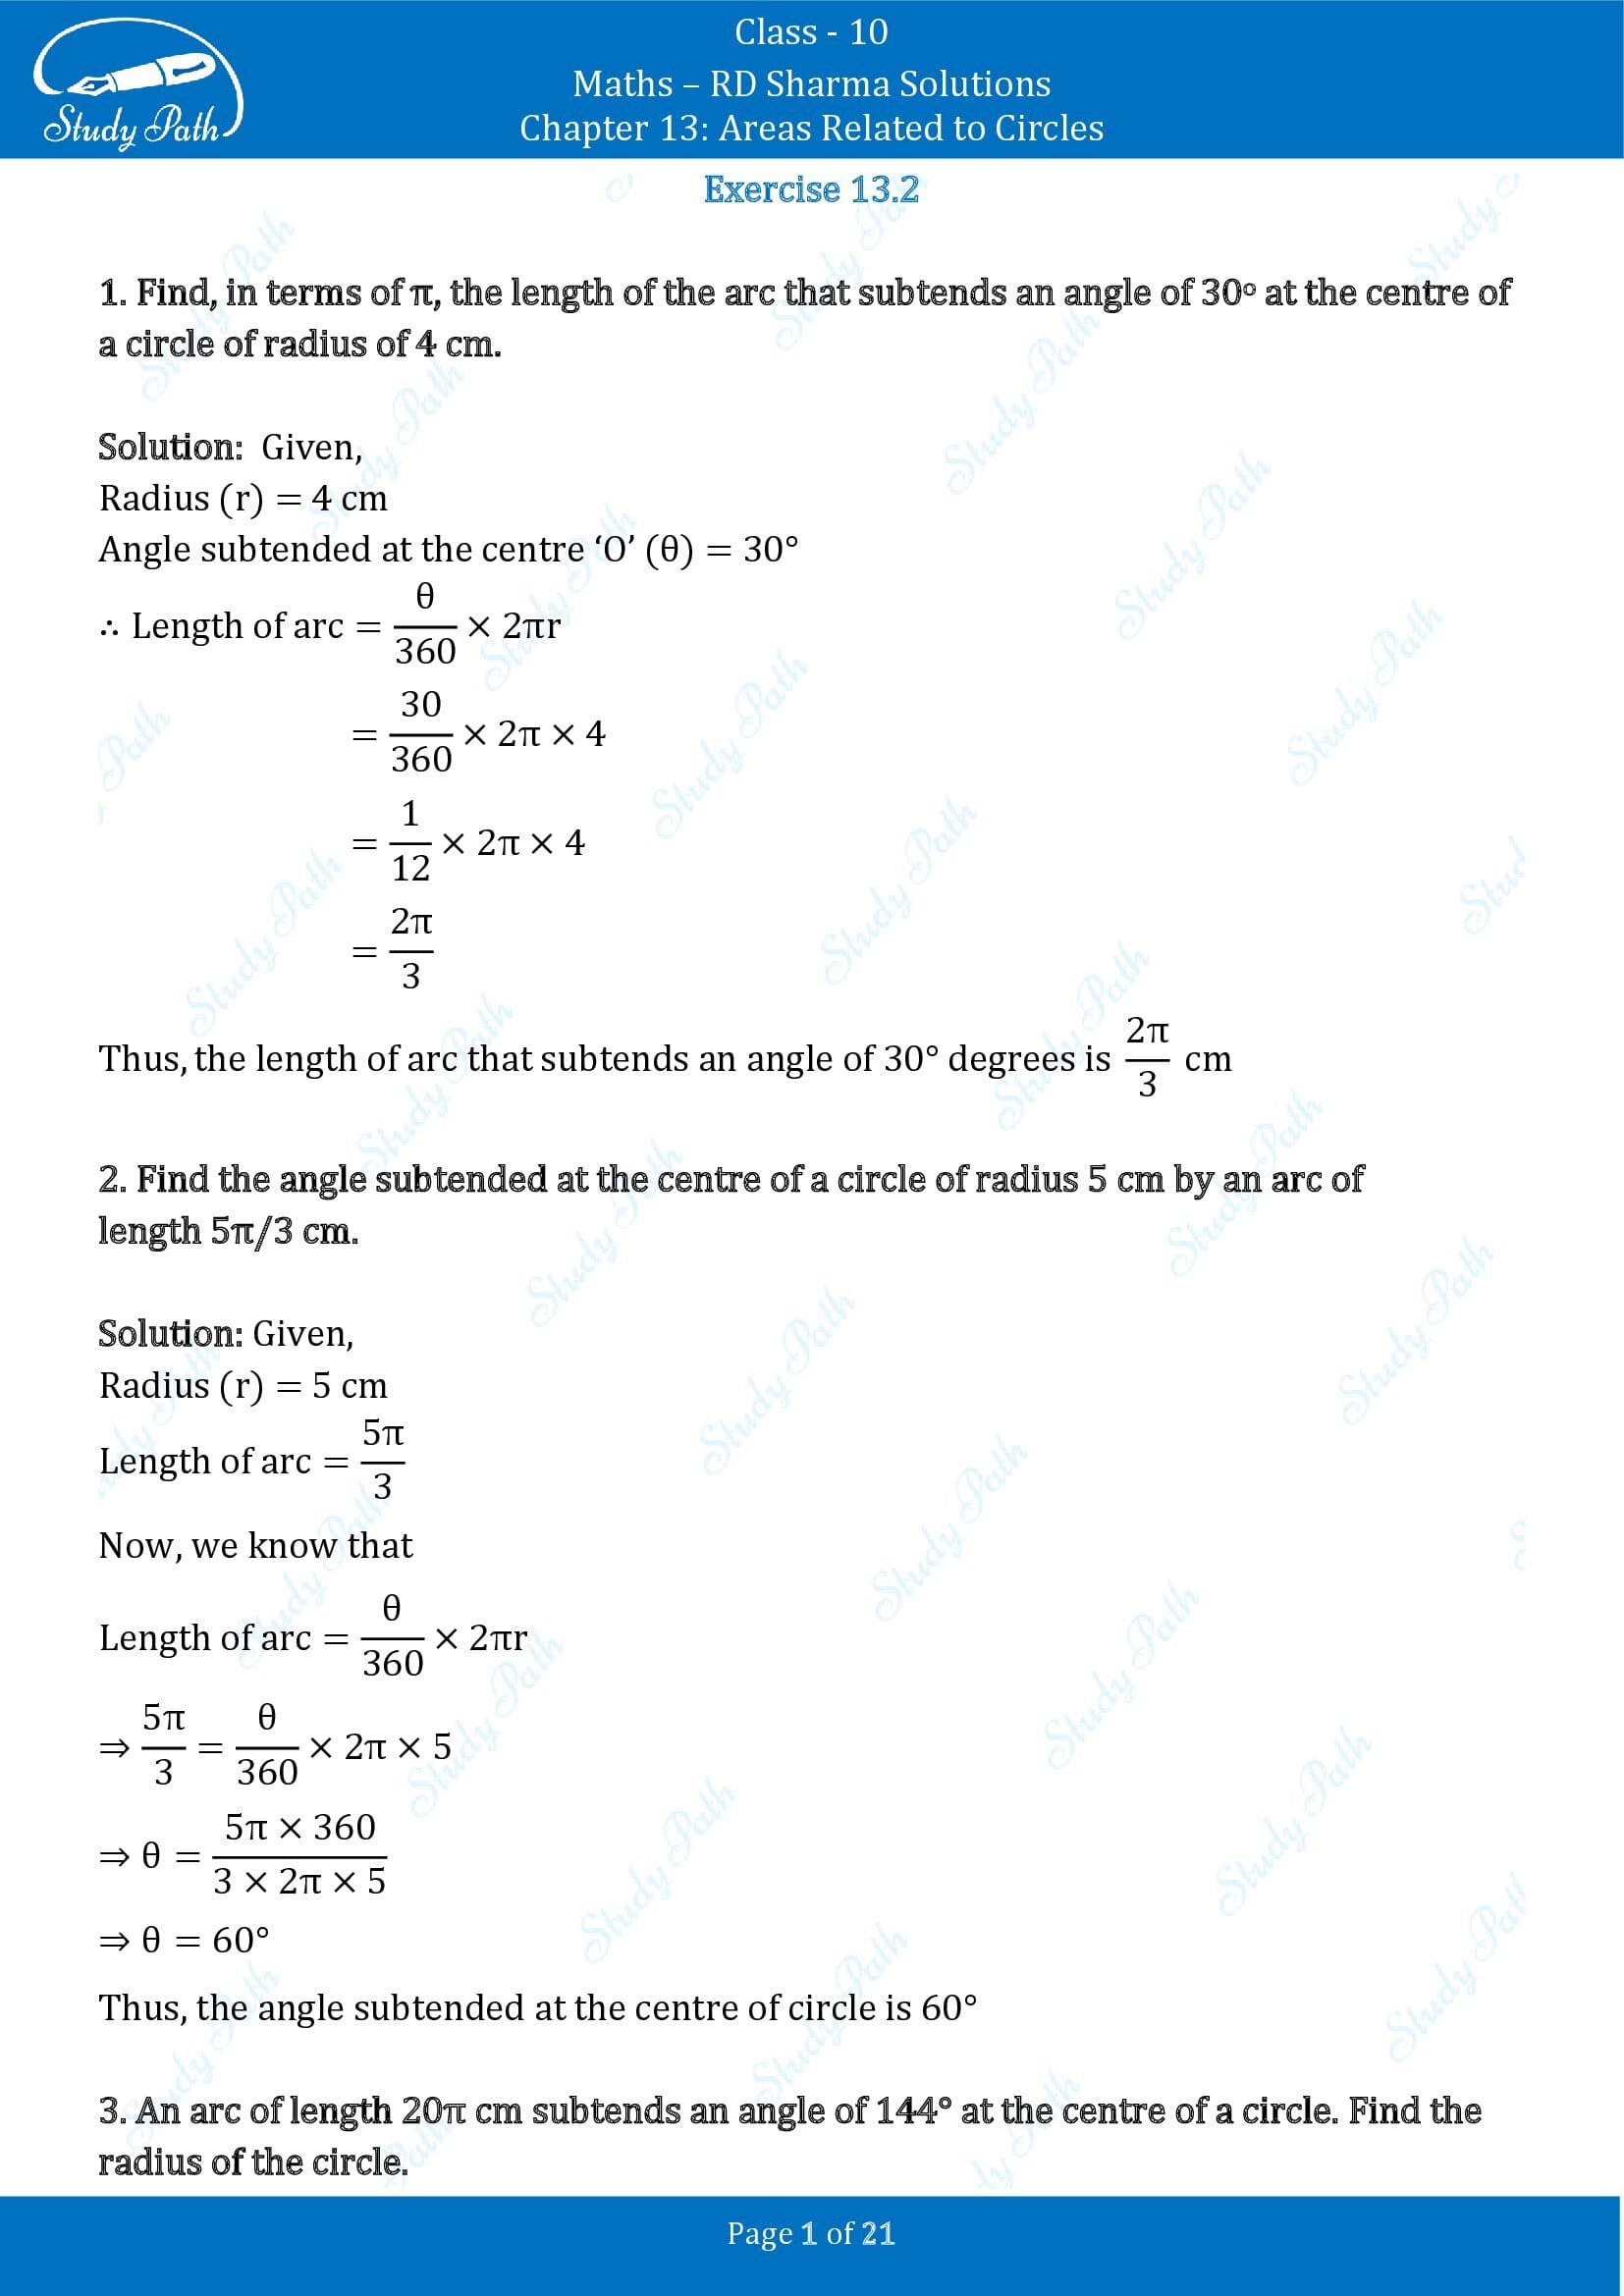 RD Sharma Solutions Class 10 Chapter 13 Areas Related to Circles Exercise 13.2 00001